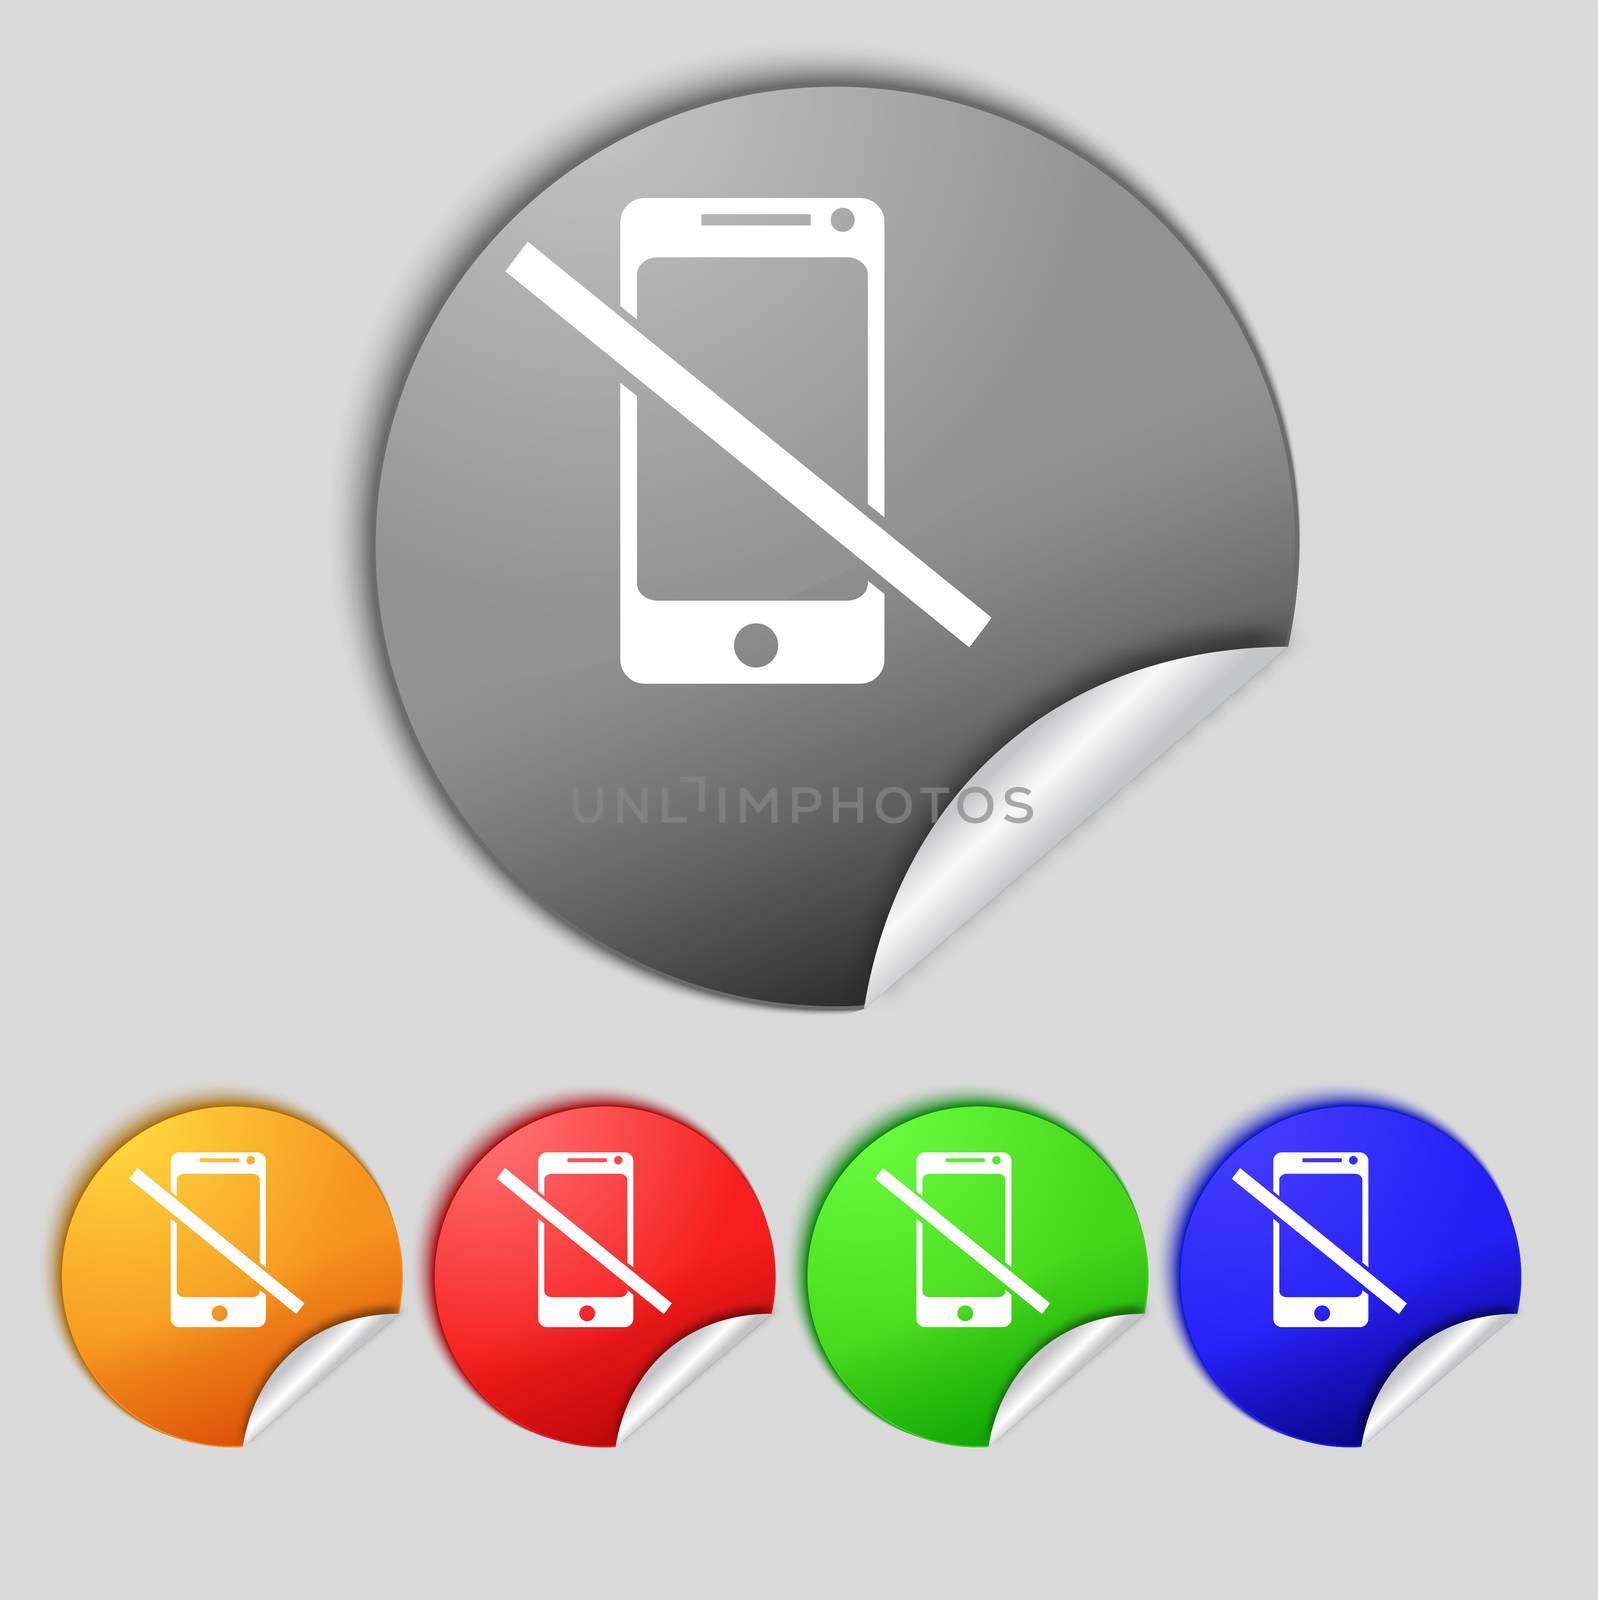 Do not call. Smartphone sign icon. Support symbol. Call center prohibition sign Stop flat symbol  illustration